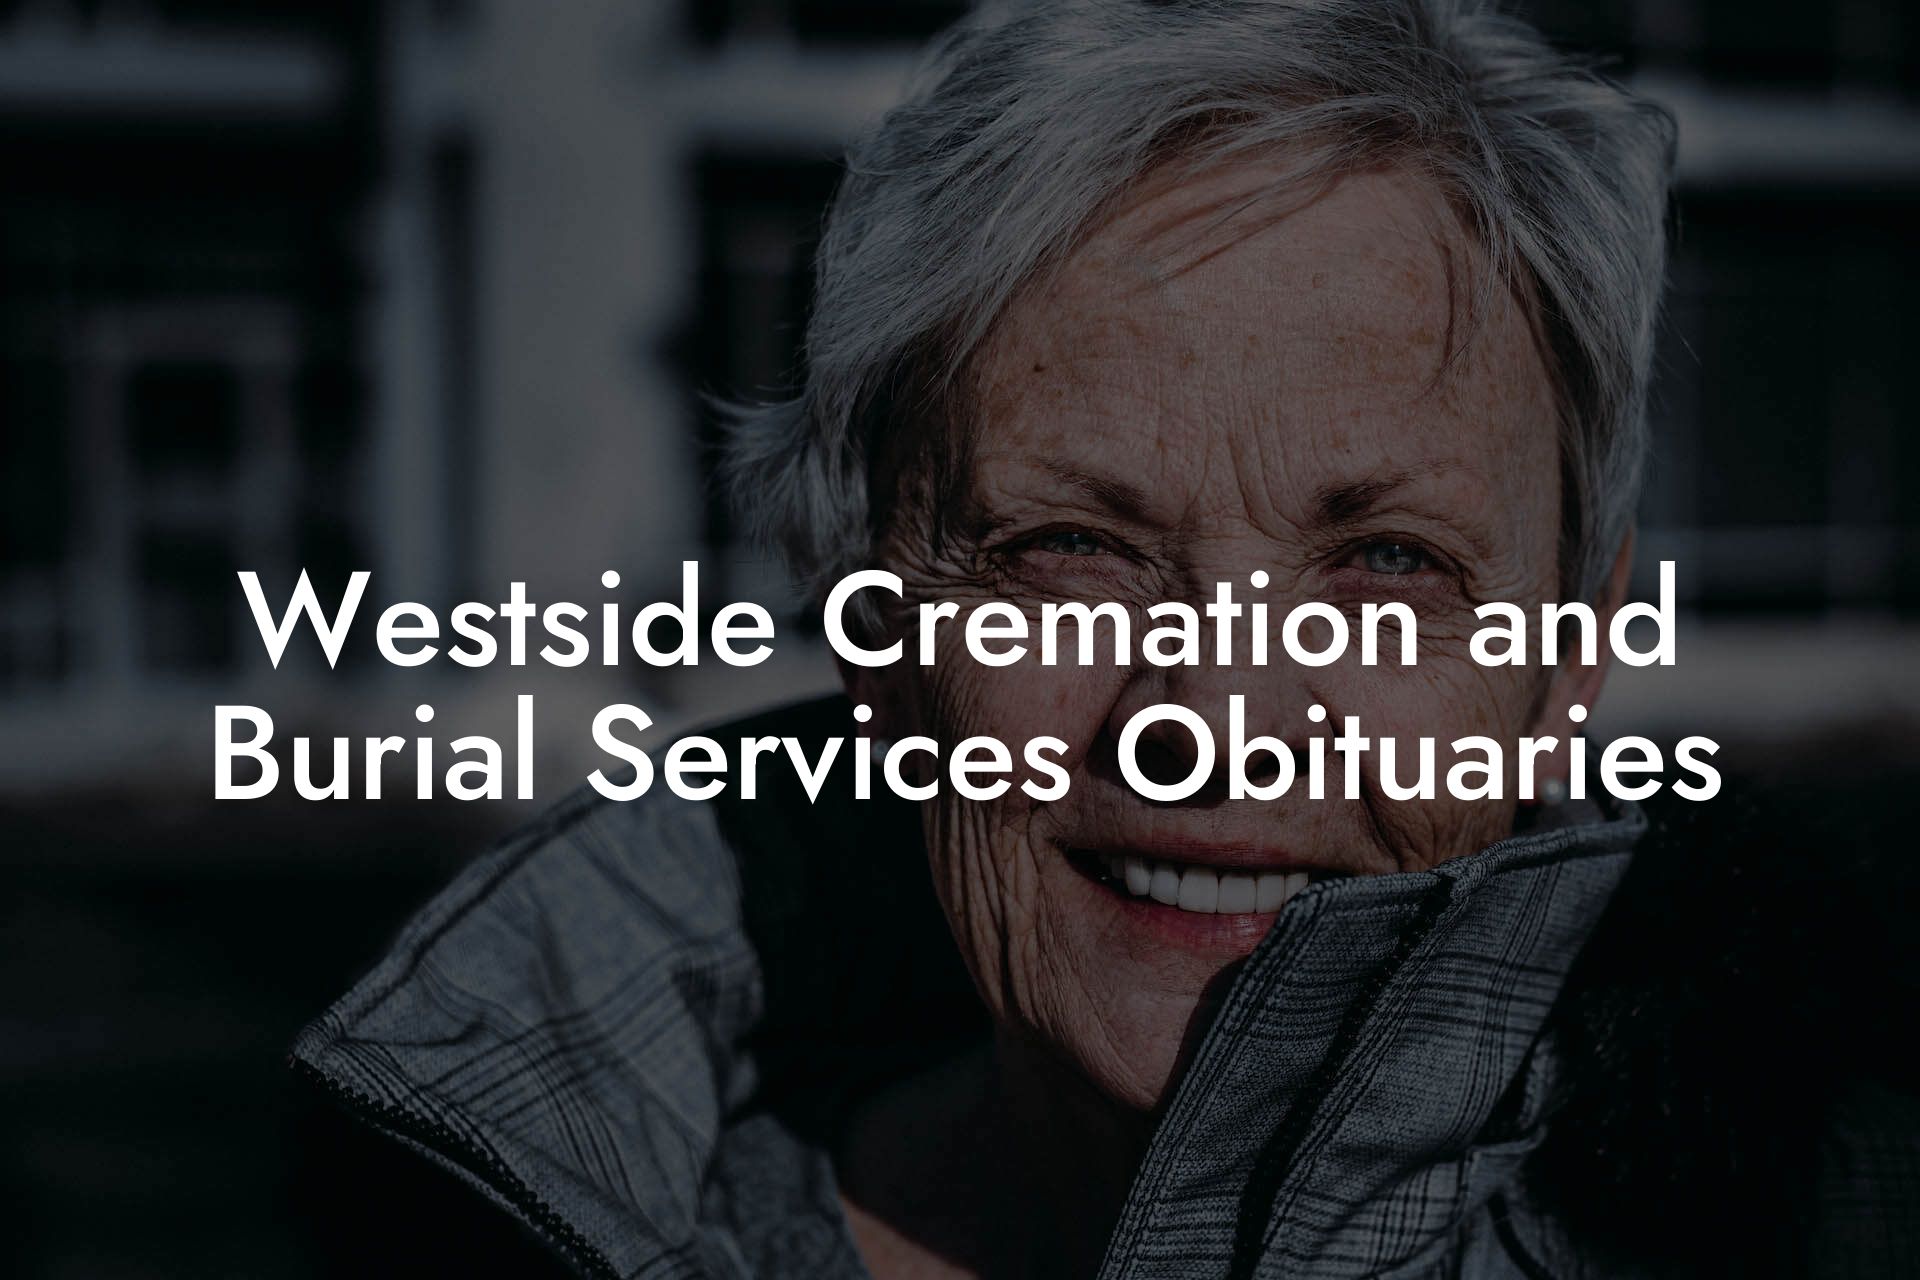 Westside Cremation and Burial Services Obituaries